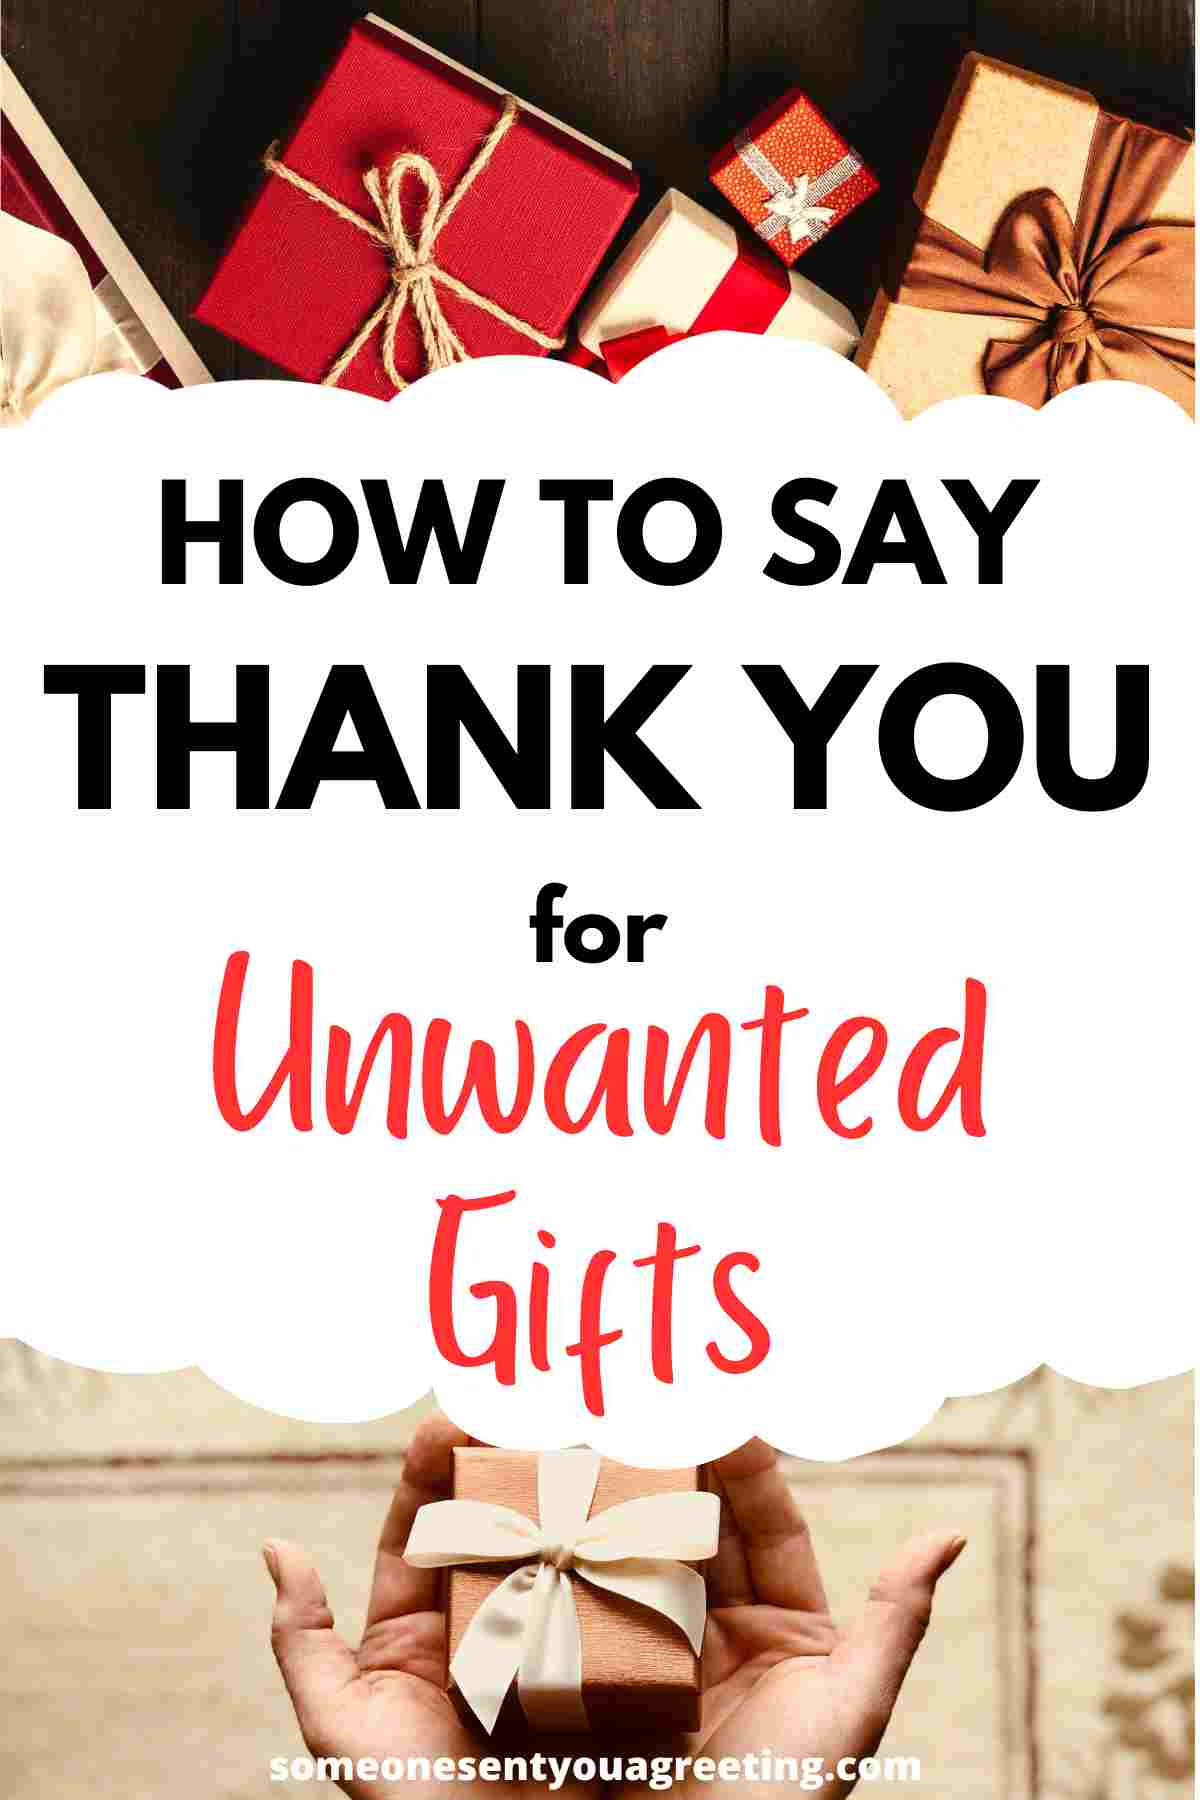 how to say thank you for unwanted gifts